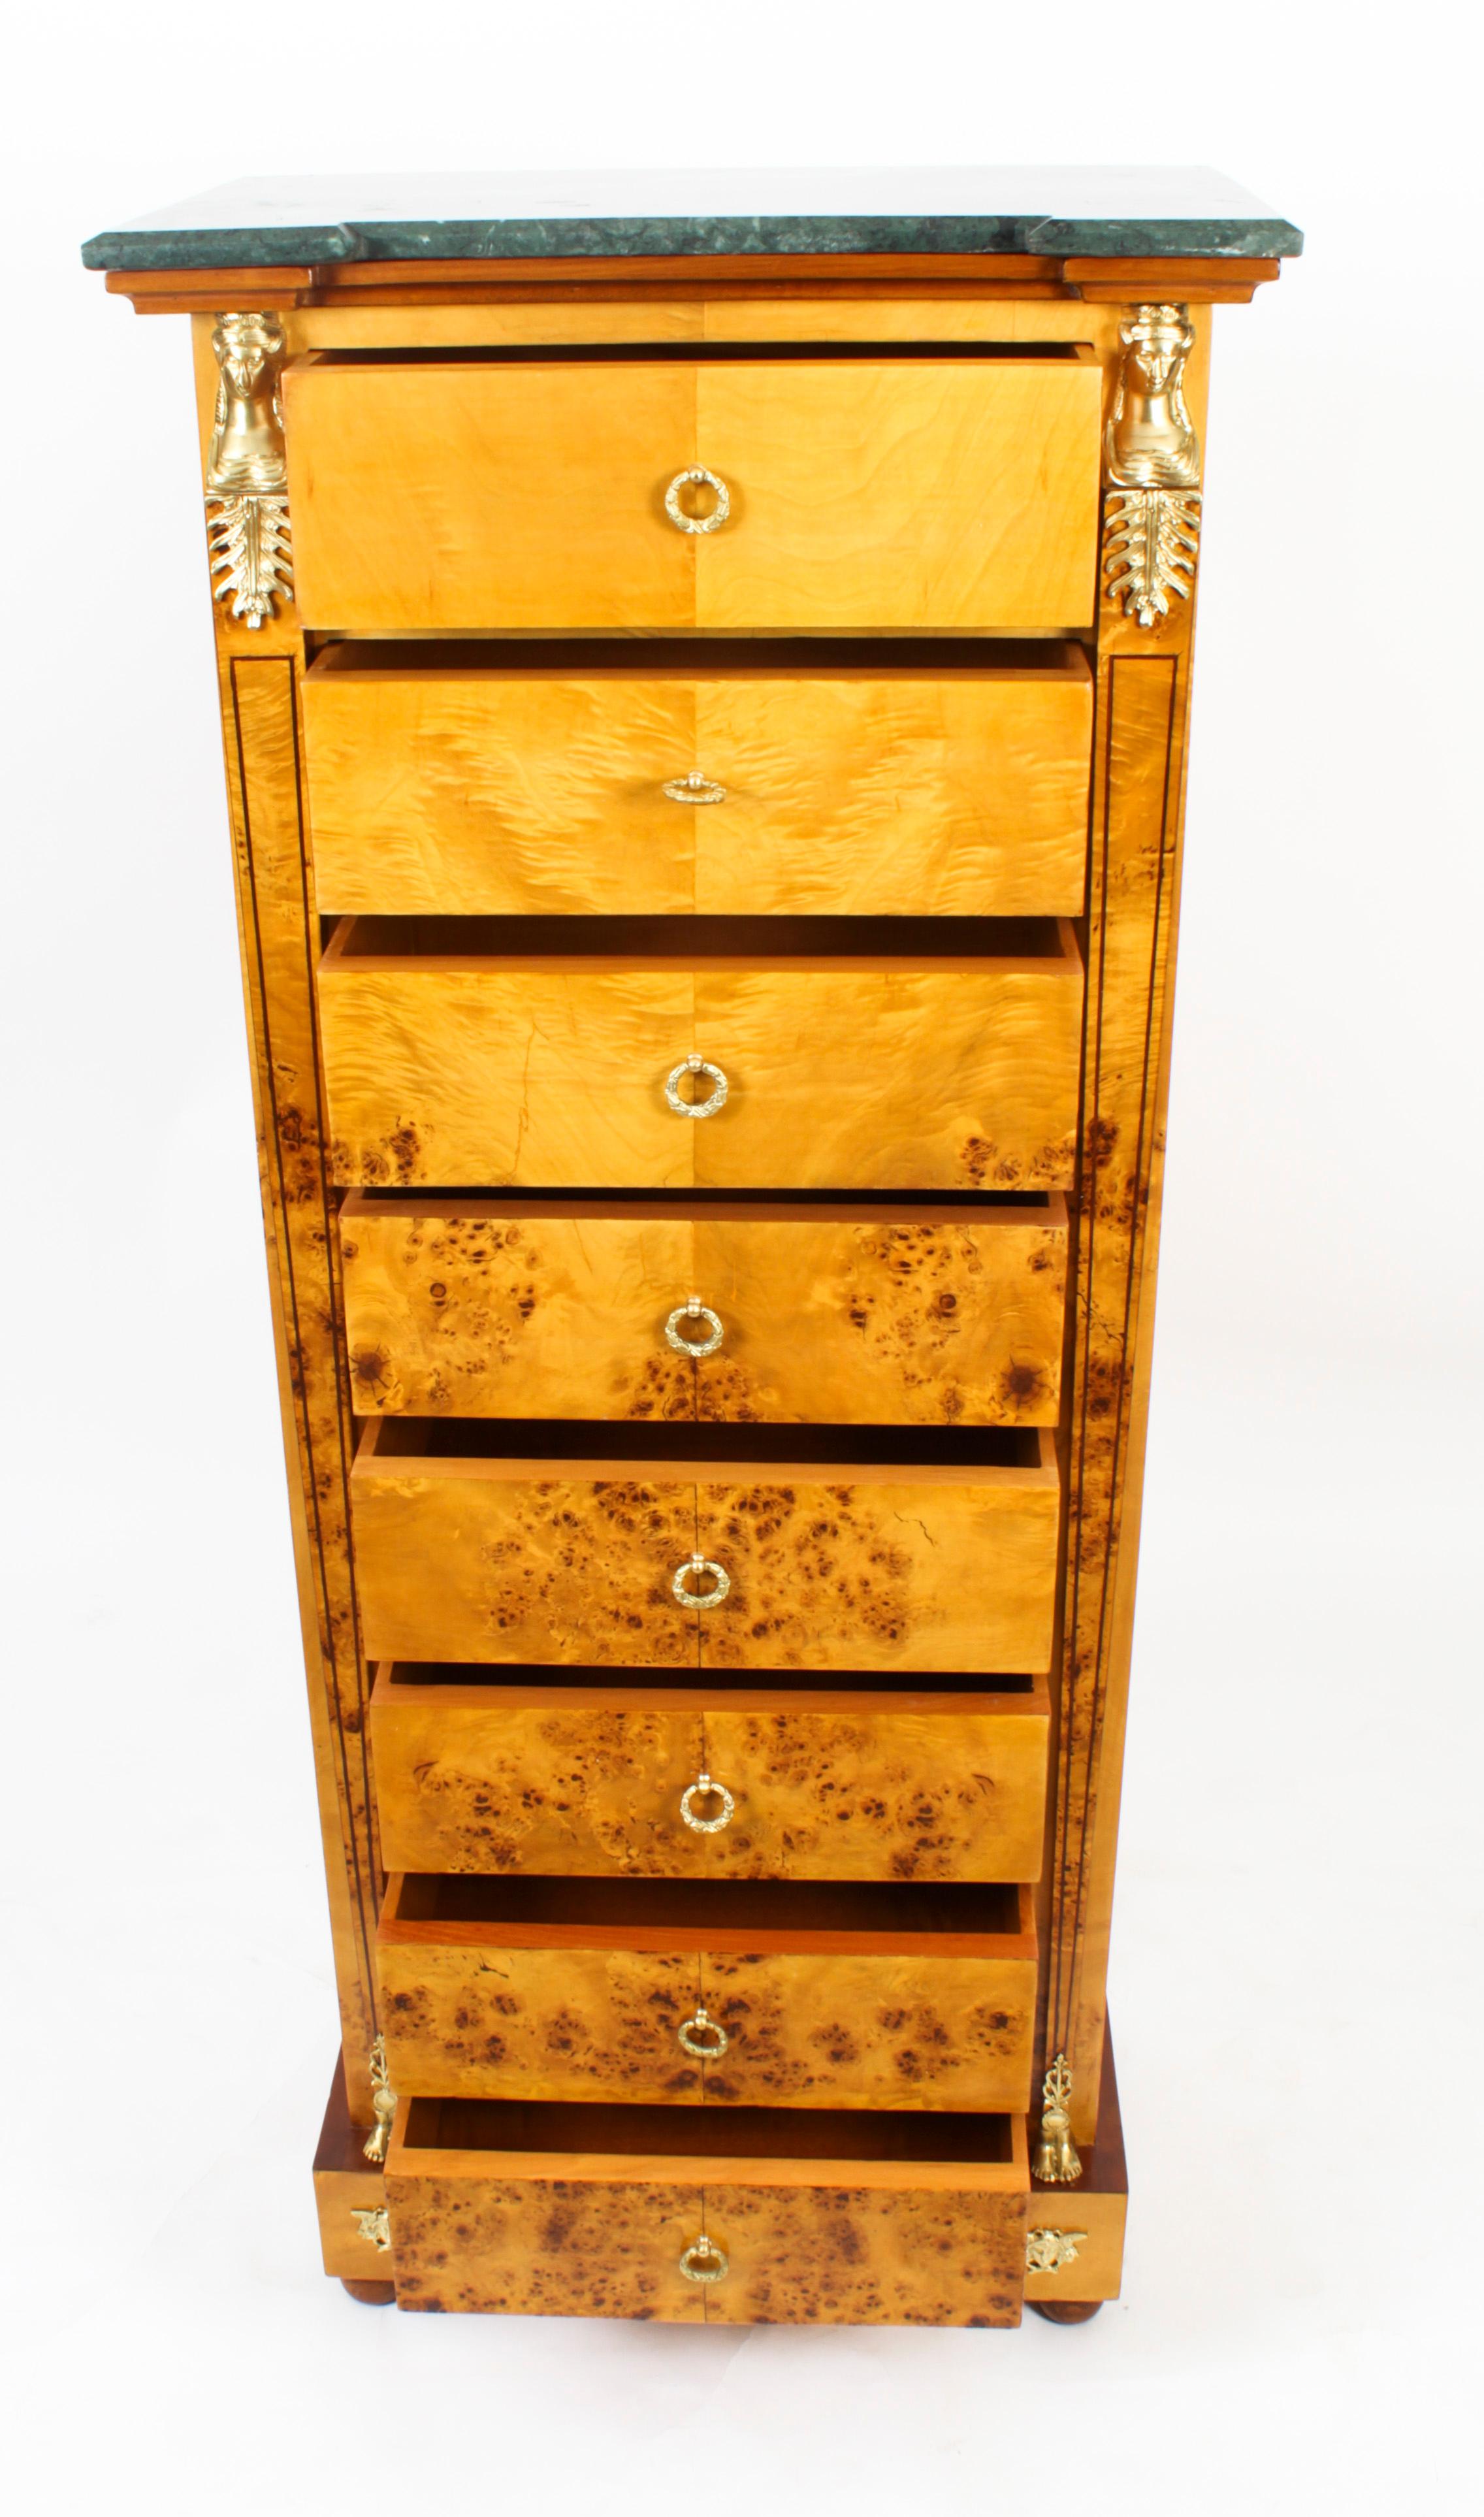 Vintage Empire Revival Burr Maple Tall Chest 20th Century For Sale 10